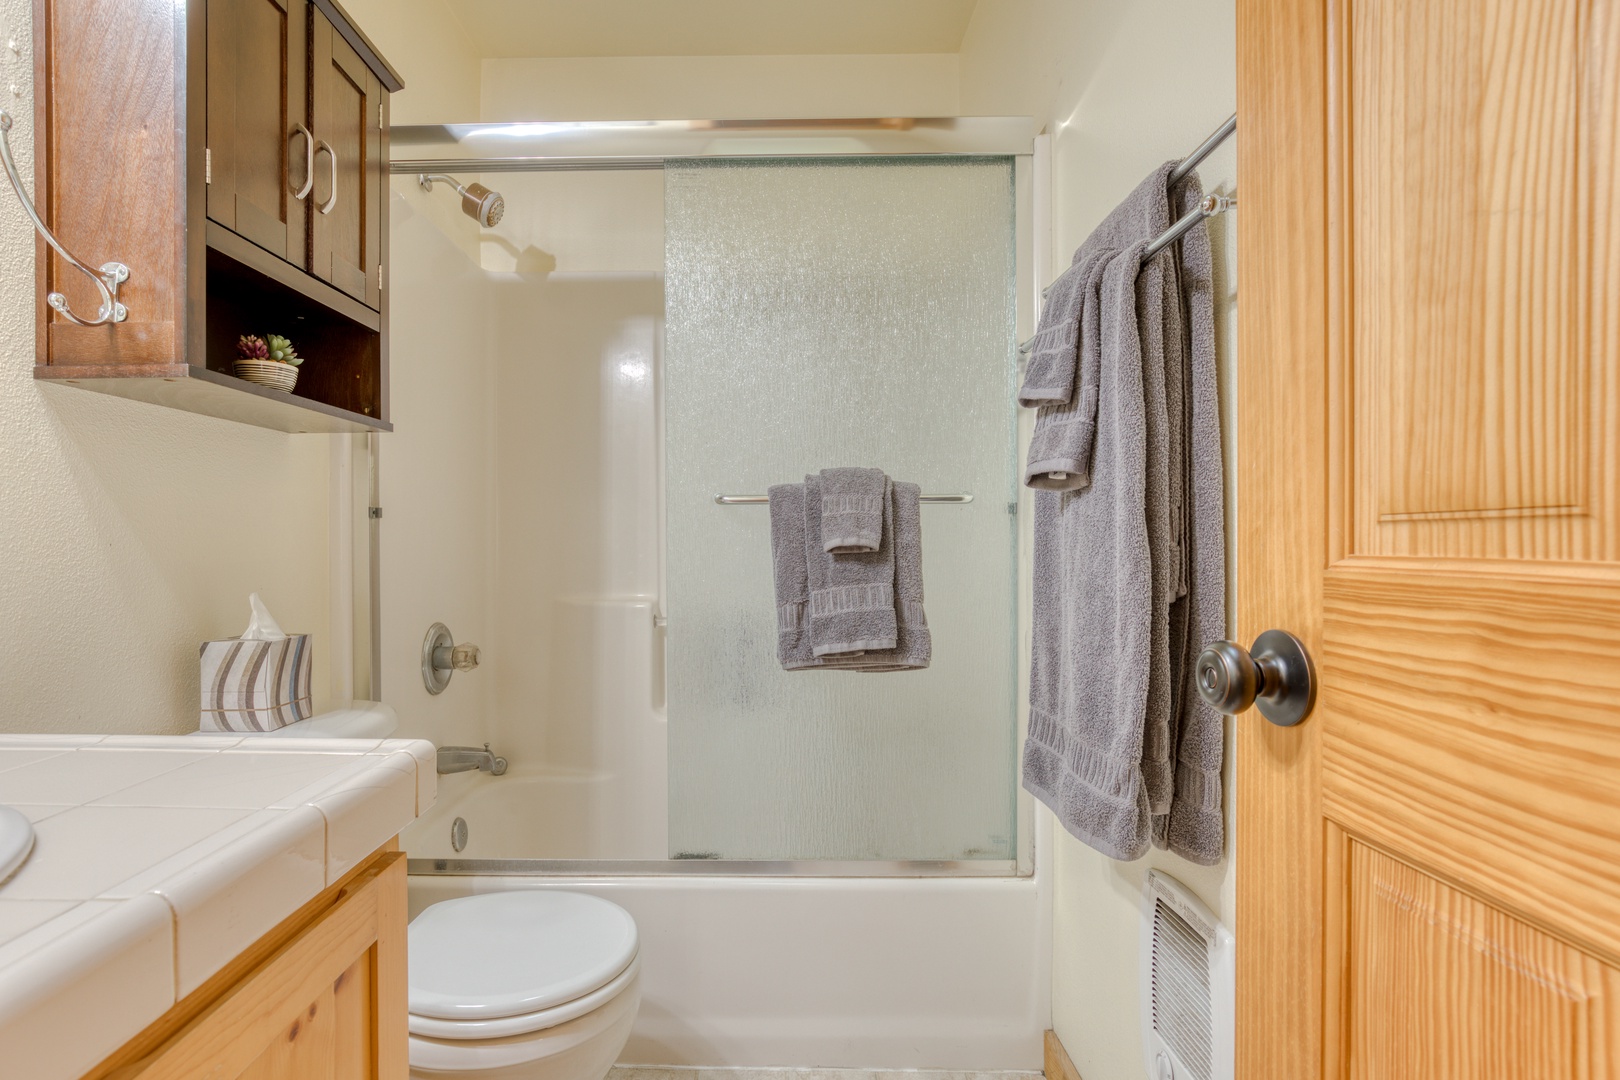 Brightwood Vacation Rentals, Riverside Retreat - Full shared bath accessible from the hallway